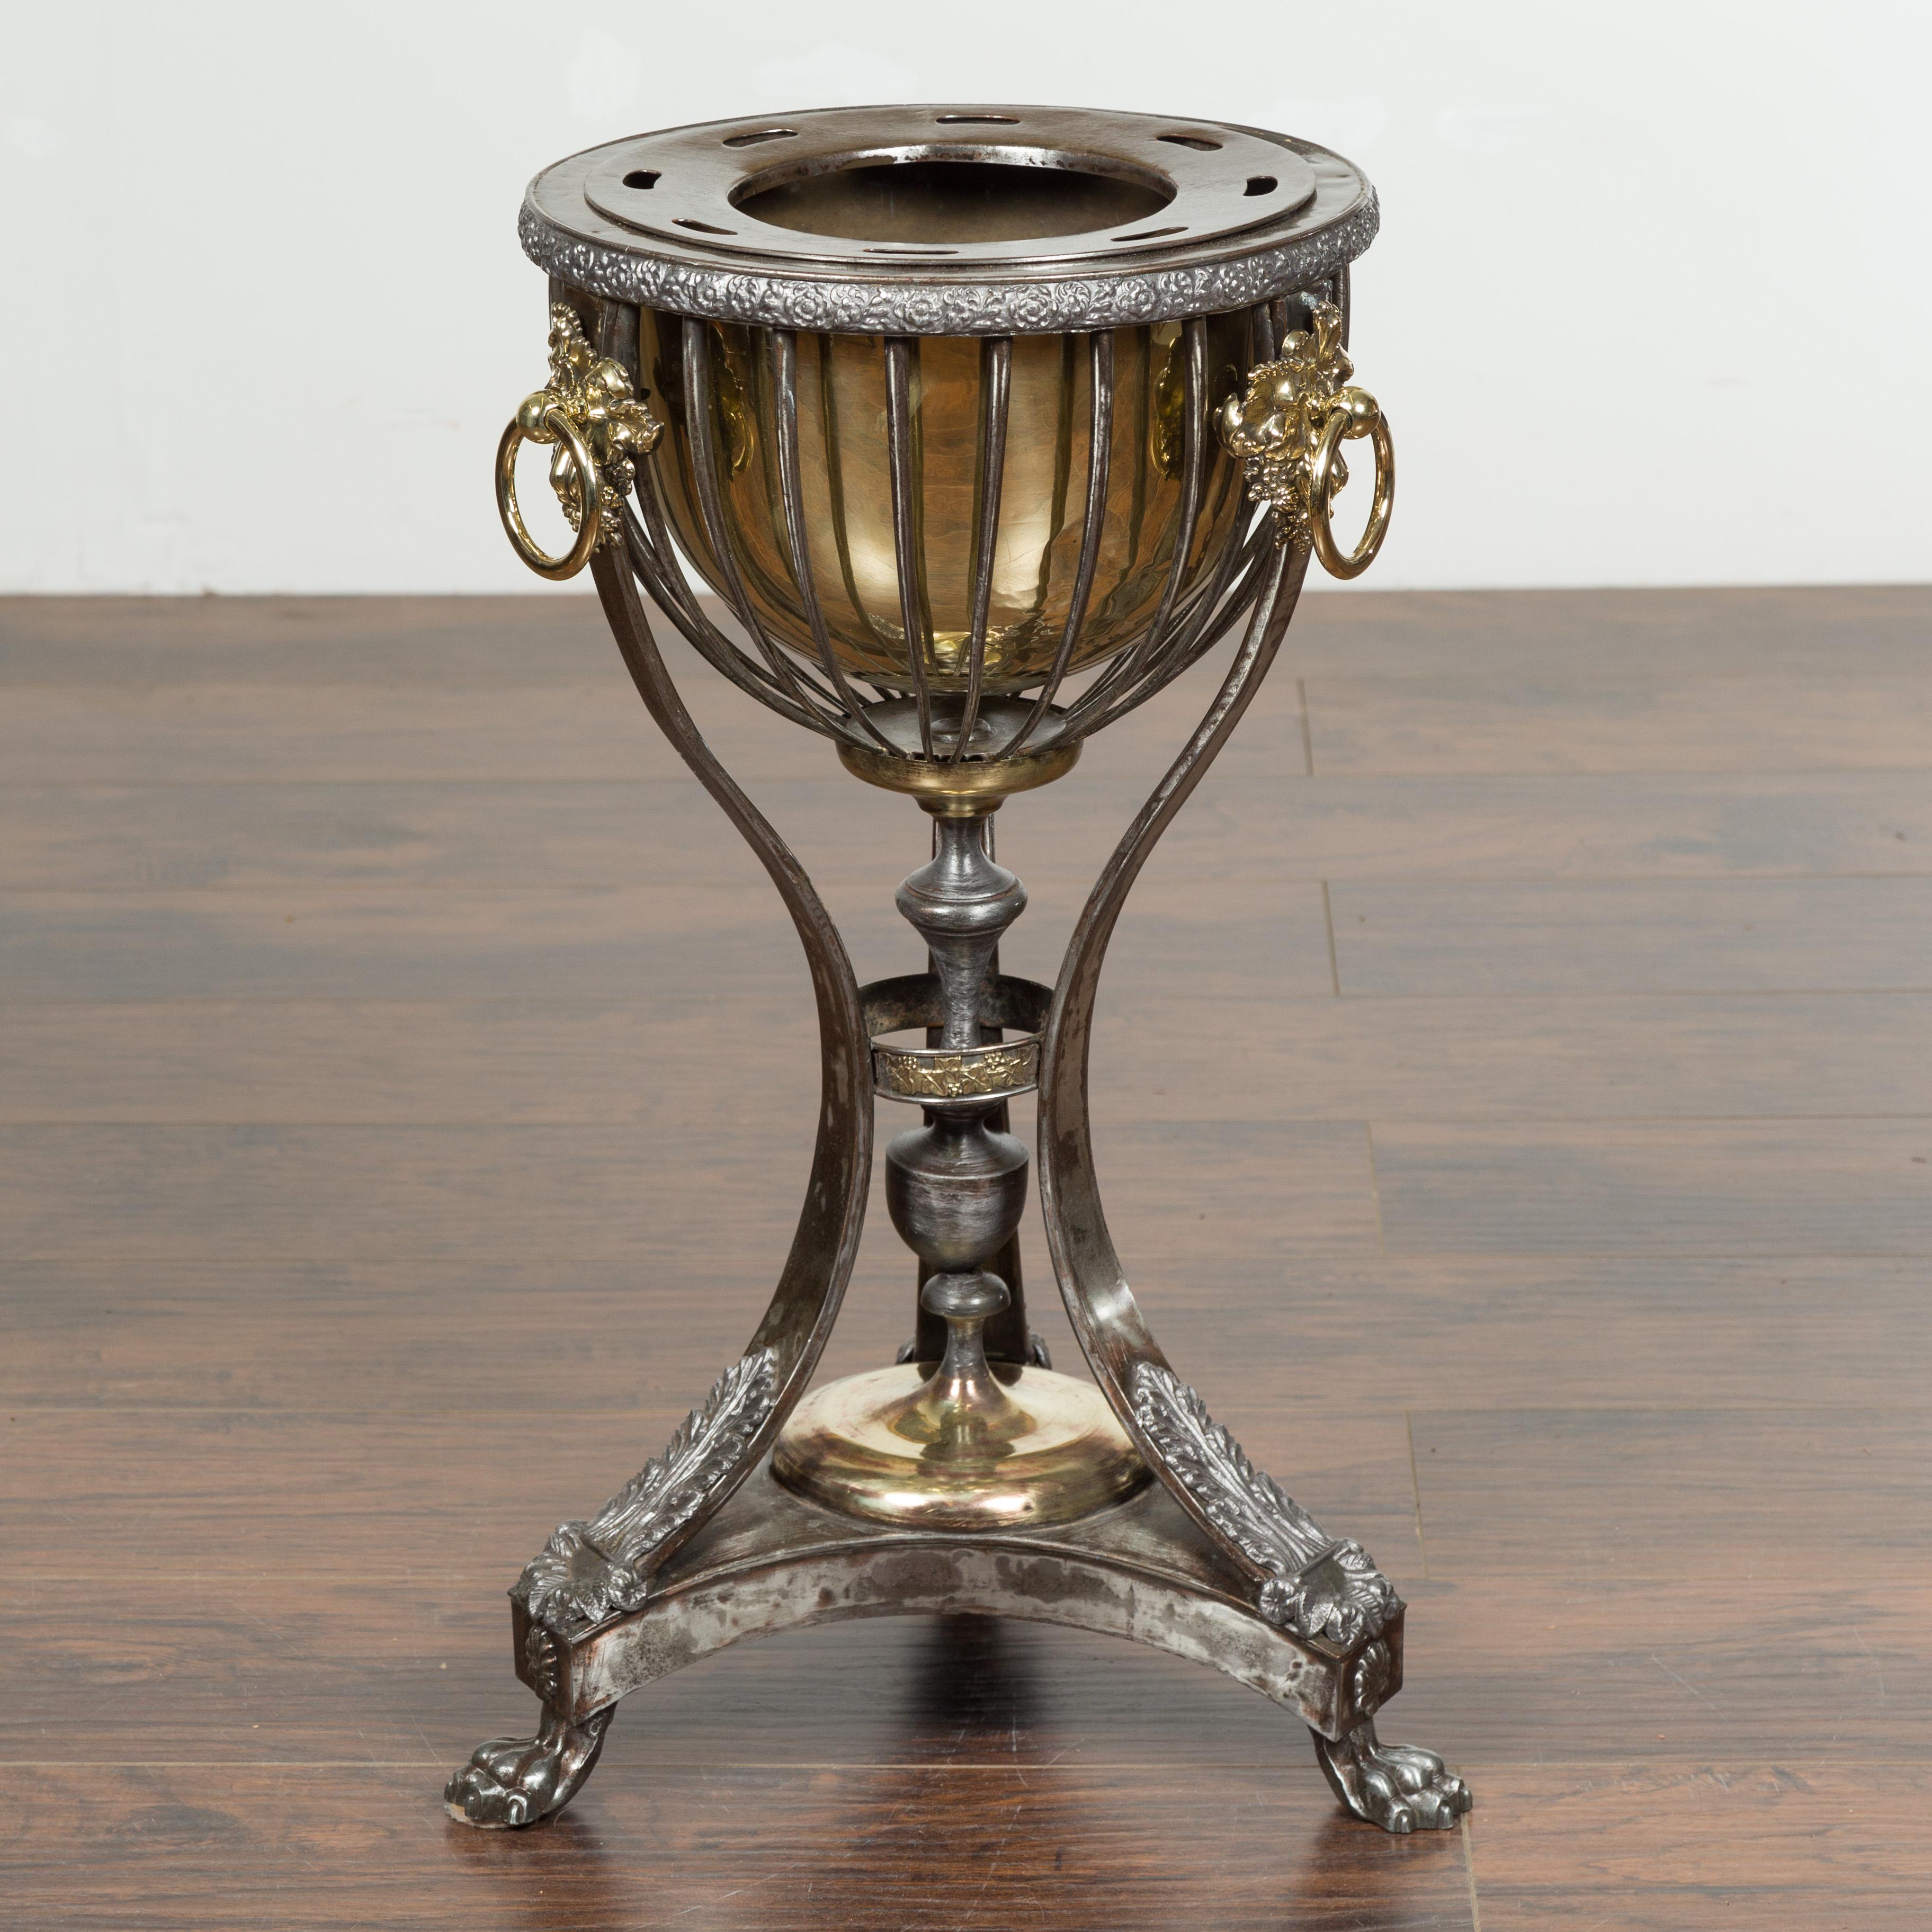 English 1820s Steel and Brass Tripod Wine Cooler with Foliage and Fruit Motifs For Sale 8